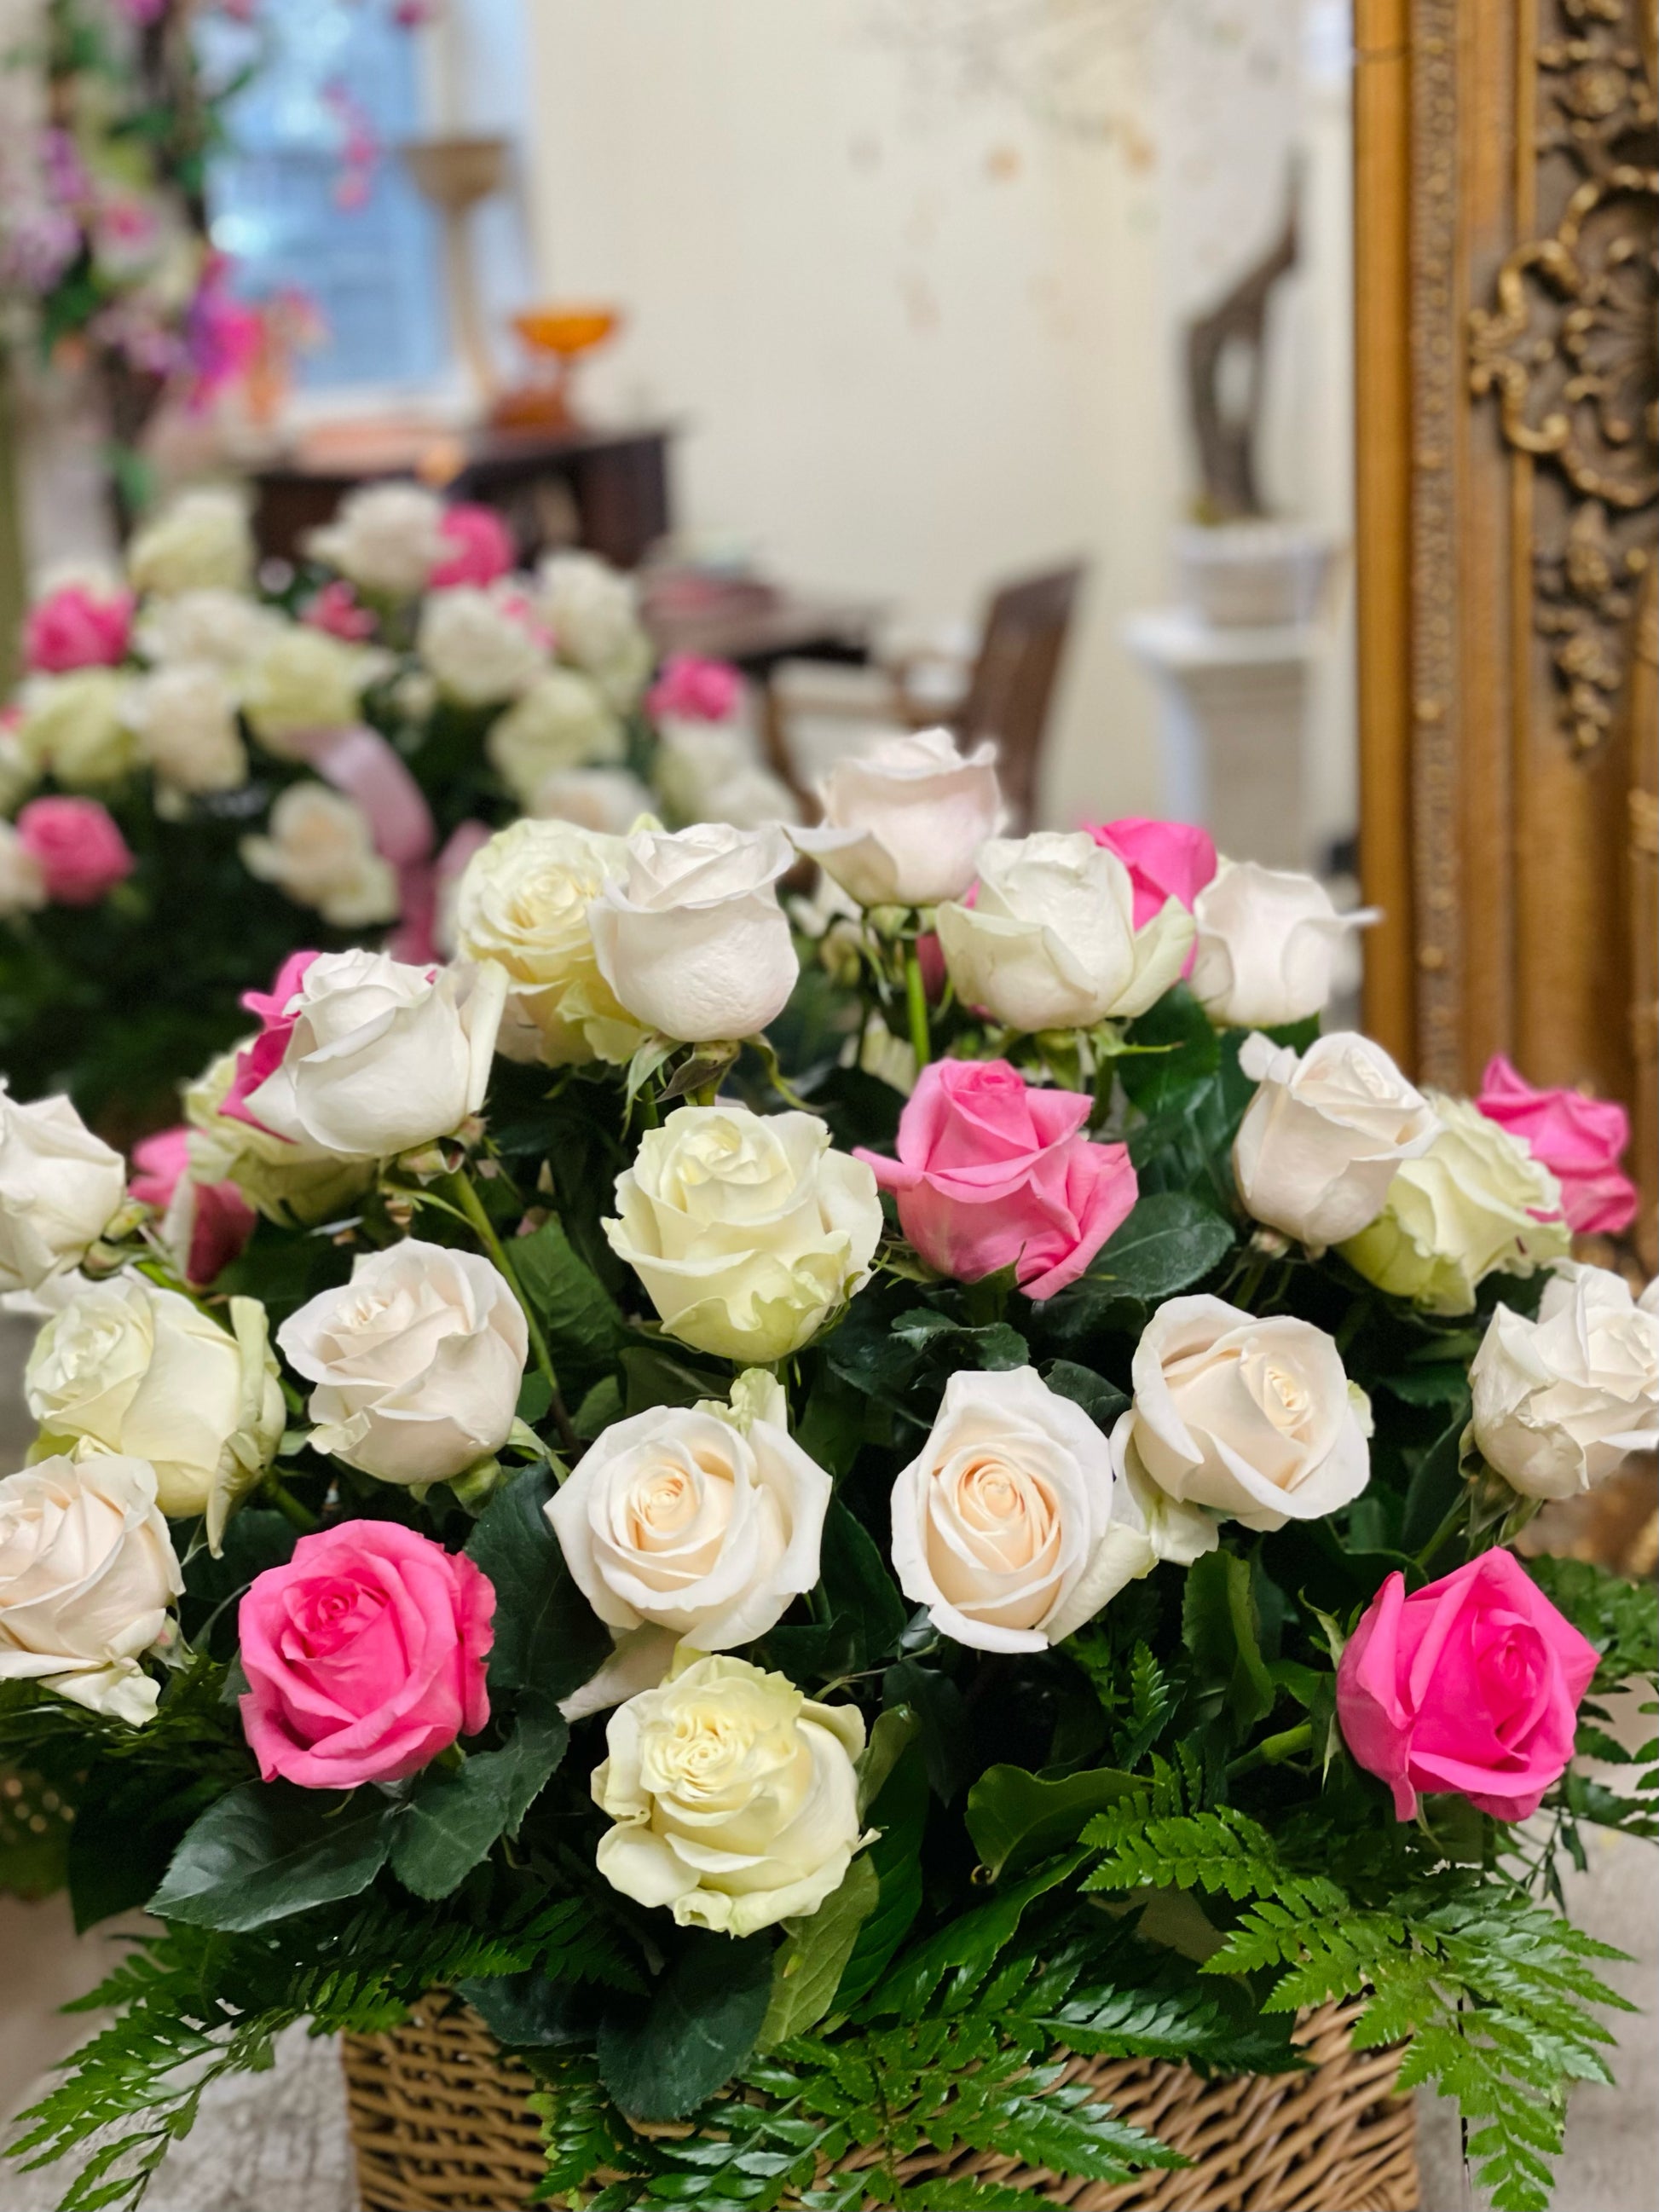 Basket with 36 roses - Tramonti Flowers & Events